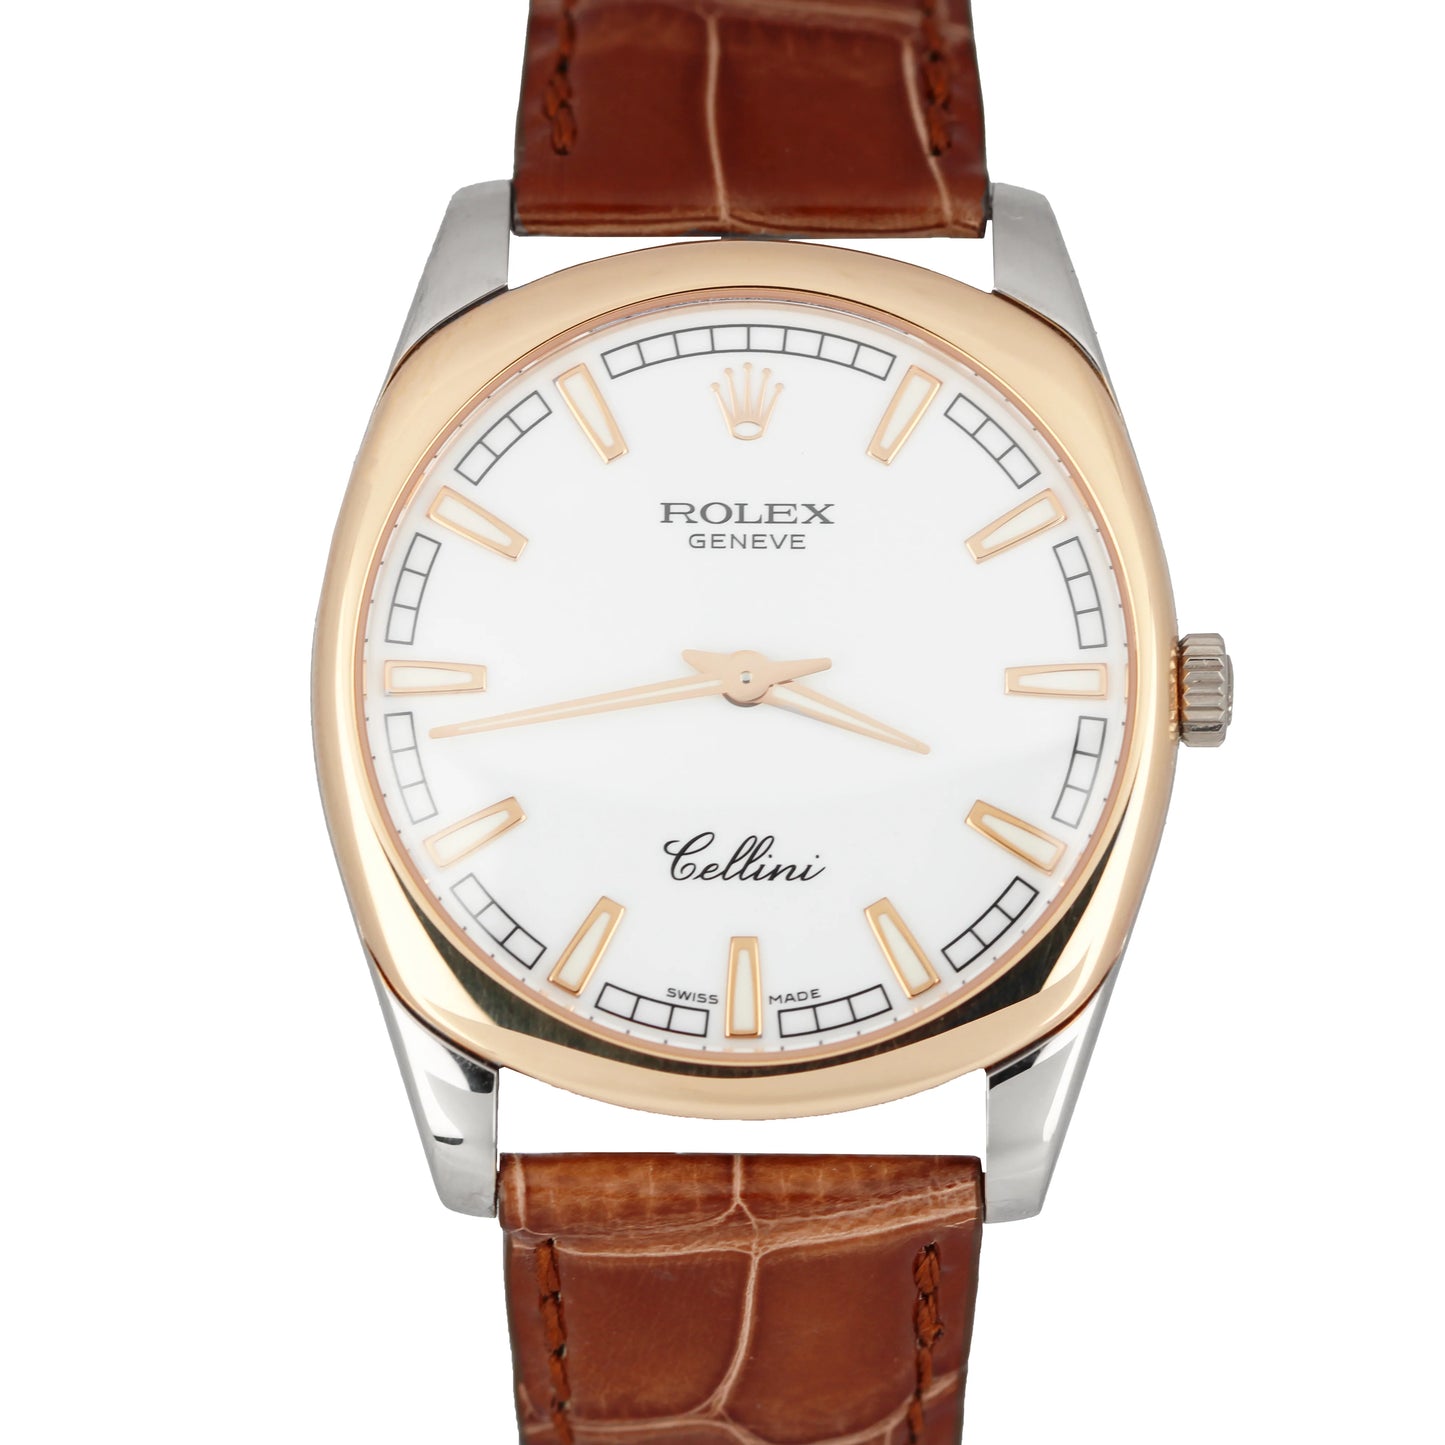 Rolex Cellini Danaos White Dial 18K Gold 38mm Brown Leather 4243 Watch B&P